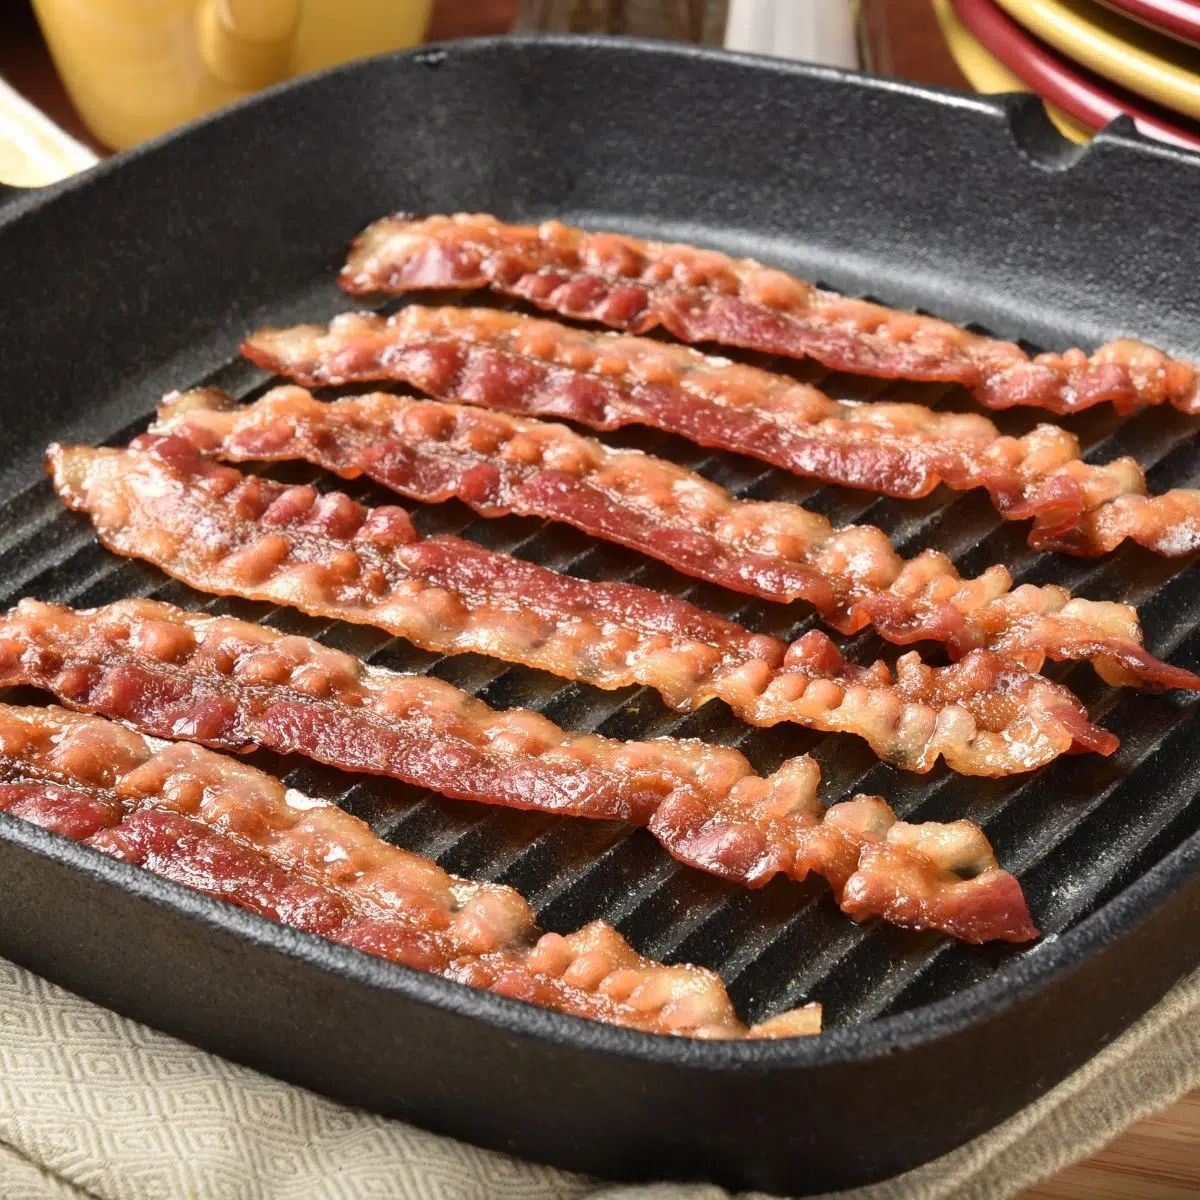 How many slices of bacon per pound for cooking up bacon.